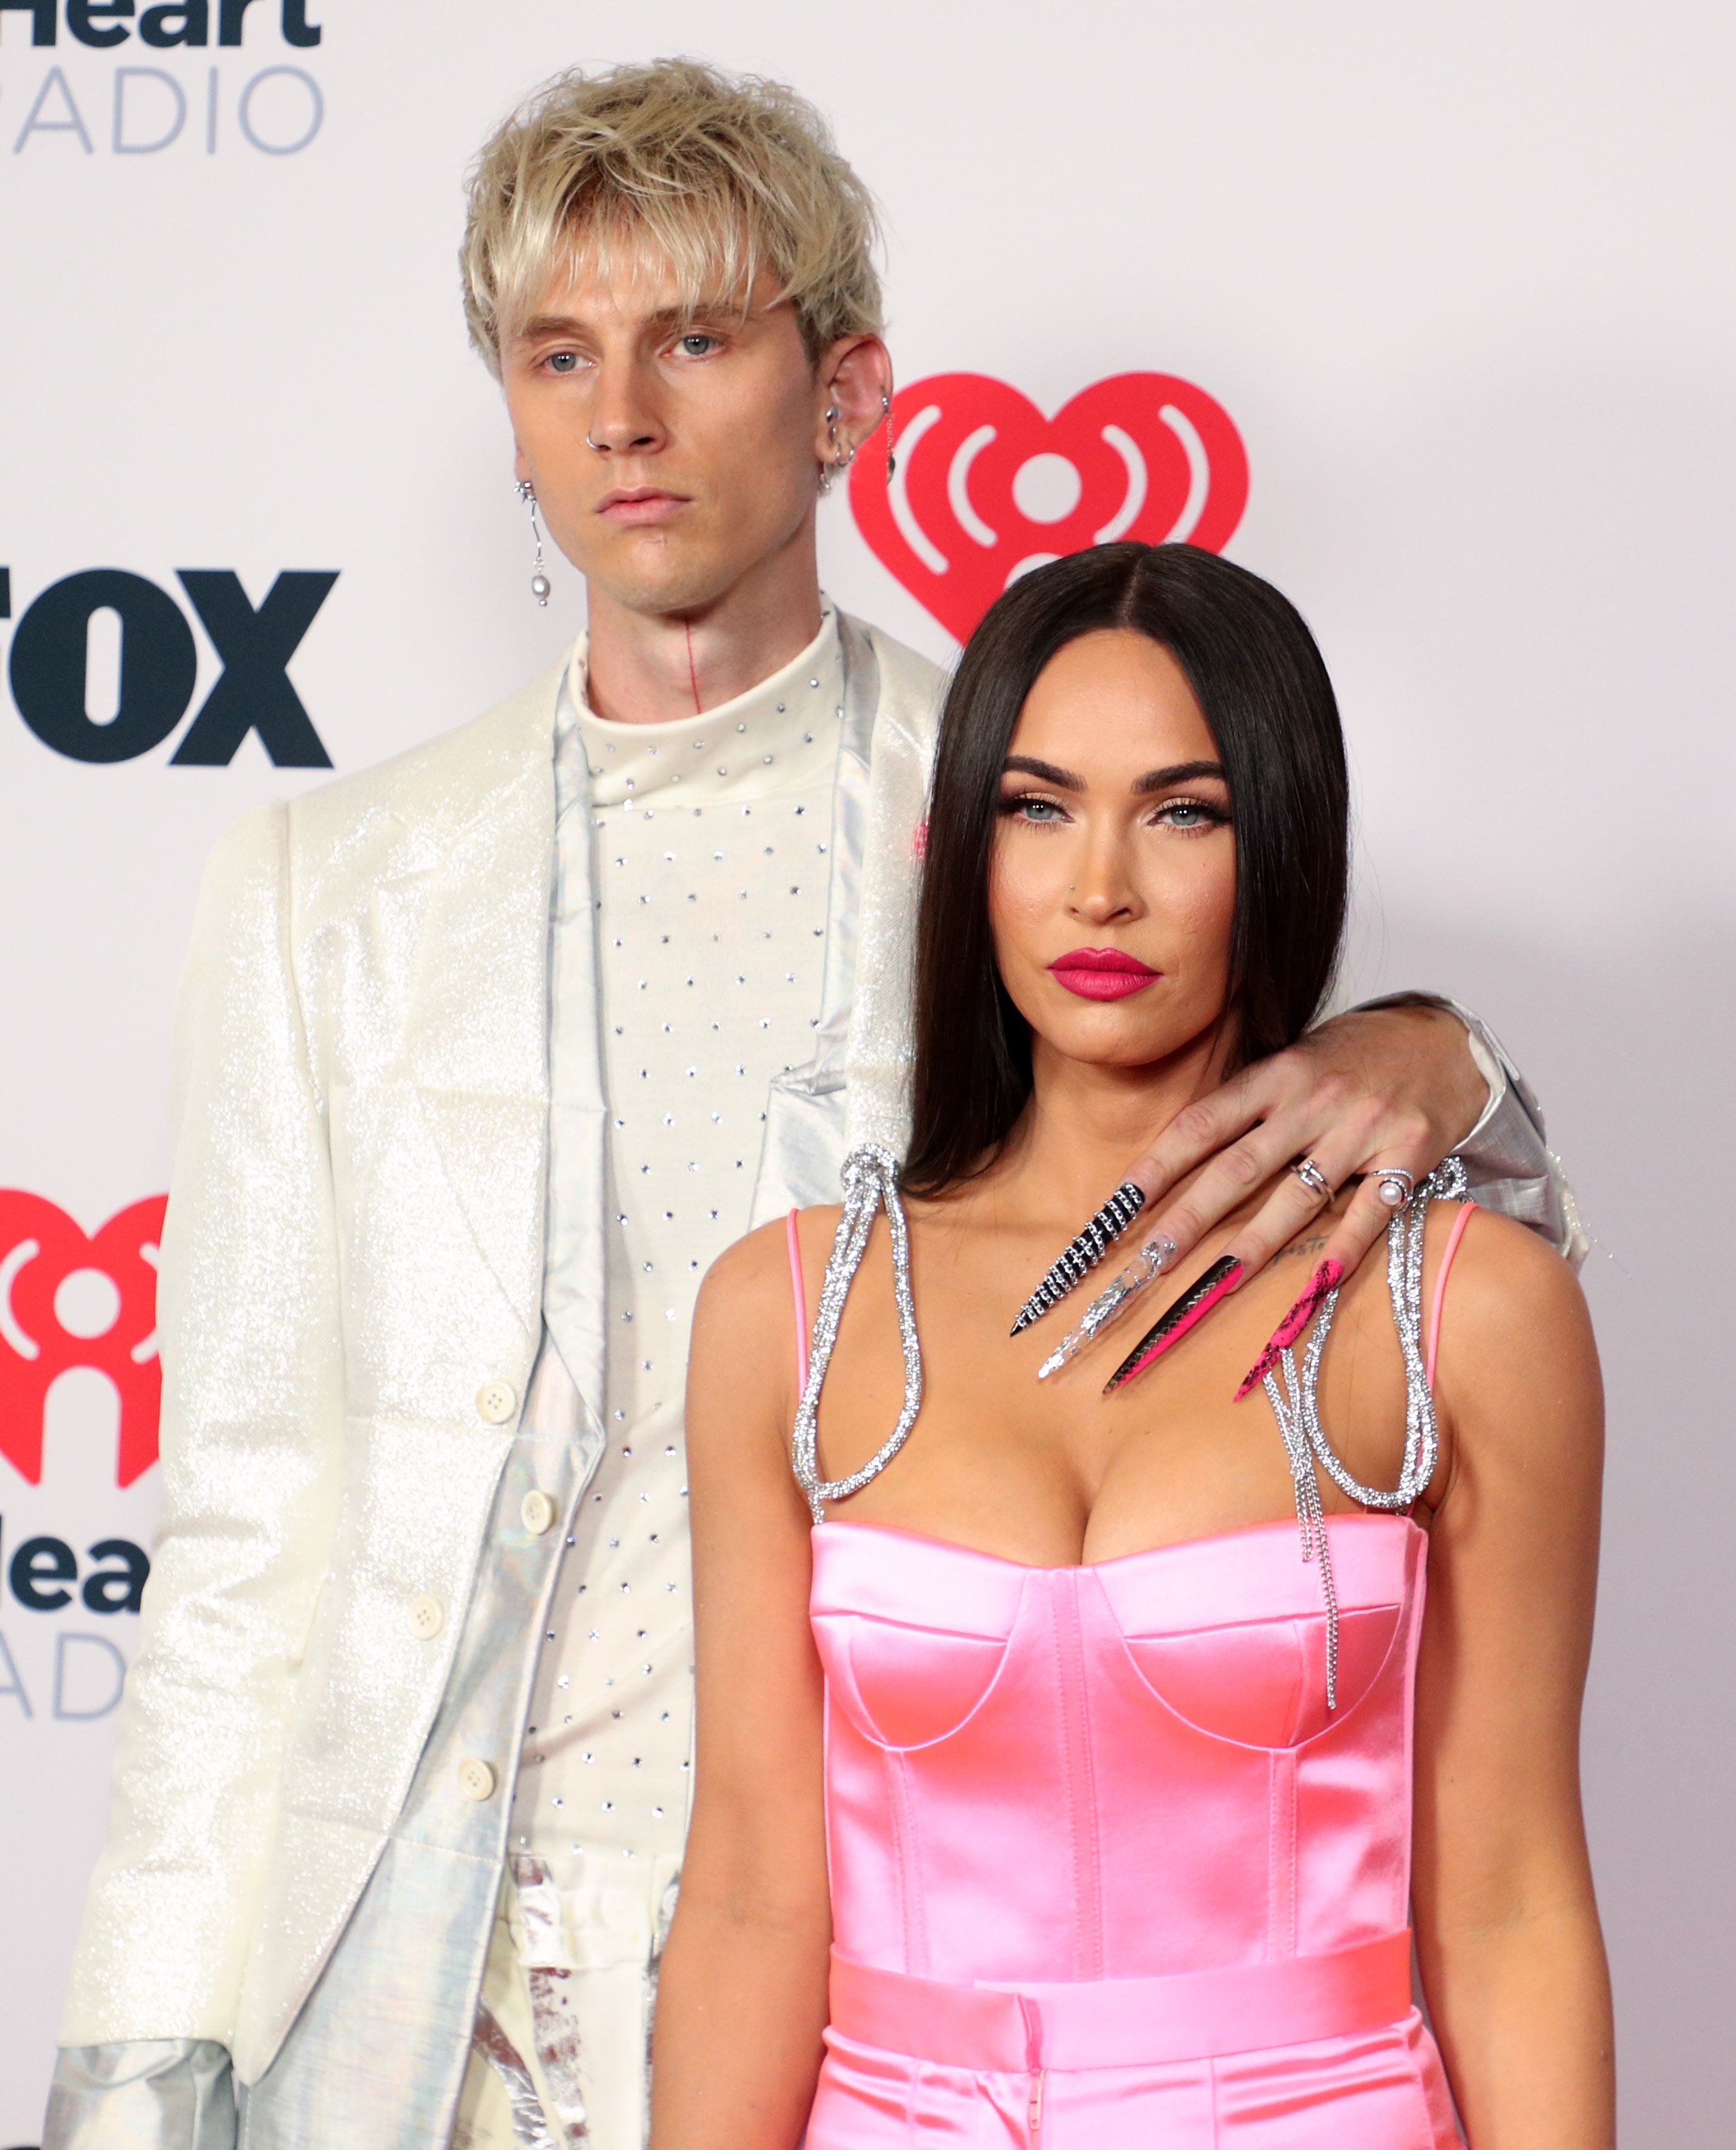 <p>Megan Fox and Machine Gun Kelly (real name: Colson Baker) -- who <a href="https://www.wonderwall.com/celebrity/couples/stars-who-got-engaged-in-2022-546944.gallery?photoId=535539">got engaged</a> in January 2022 -- have let people think they met while filming the 2021 movie "Midnight in the Switchgrass" in 2020, but they actually met a few years earlier at a GQ party in Los Angeles, they told <a href="https://www.gq-magazine.co.uk/culture/article/megan-fox-machine-gun-kelly-interview">the magazine</a> in 2021. (She was still married to actor Brian Austin Green at the time.) "This weird thing happened. We didn't see each other," she said, asking MGK, "Do you remember [seeing] my face?" to which he replied, "That's what's crazy. I don't. I don't remember your face." She doesn't remember seeing his either. "I just remember this tall, blonde, ghostly creature and I looked up and I was like, 'You smell like weed.' He looked down at me and he was like, 'I am weed.' Then, I swear to God, he disappeared like a ninja in a smoke bomb." When they reunited on the set of their movie, sparks flew, and they soon became a couple as she moved on from her marriage. The musician-actor told GQ that for their first real date, he picked Megan up in a 1974 Cadillac convertible. They listened to Ella Fitzgerald songs and he drove her to the edge of a canyon where his friend had set the mood, prepping the spot with roses and a picnic. They then drove down Sunset Boulevard to the Roxy Theatre, a music venue. But it was closed, so "we went to the roof and played pop punk [music] and made out," MGK told GQ. </p>